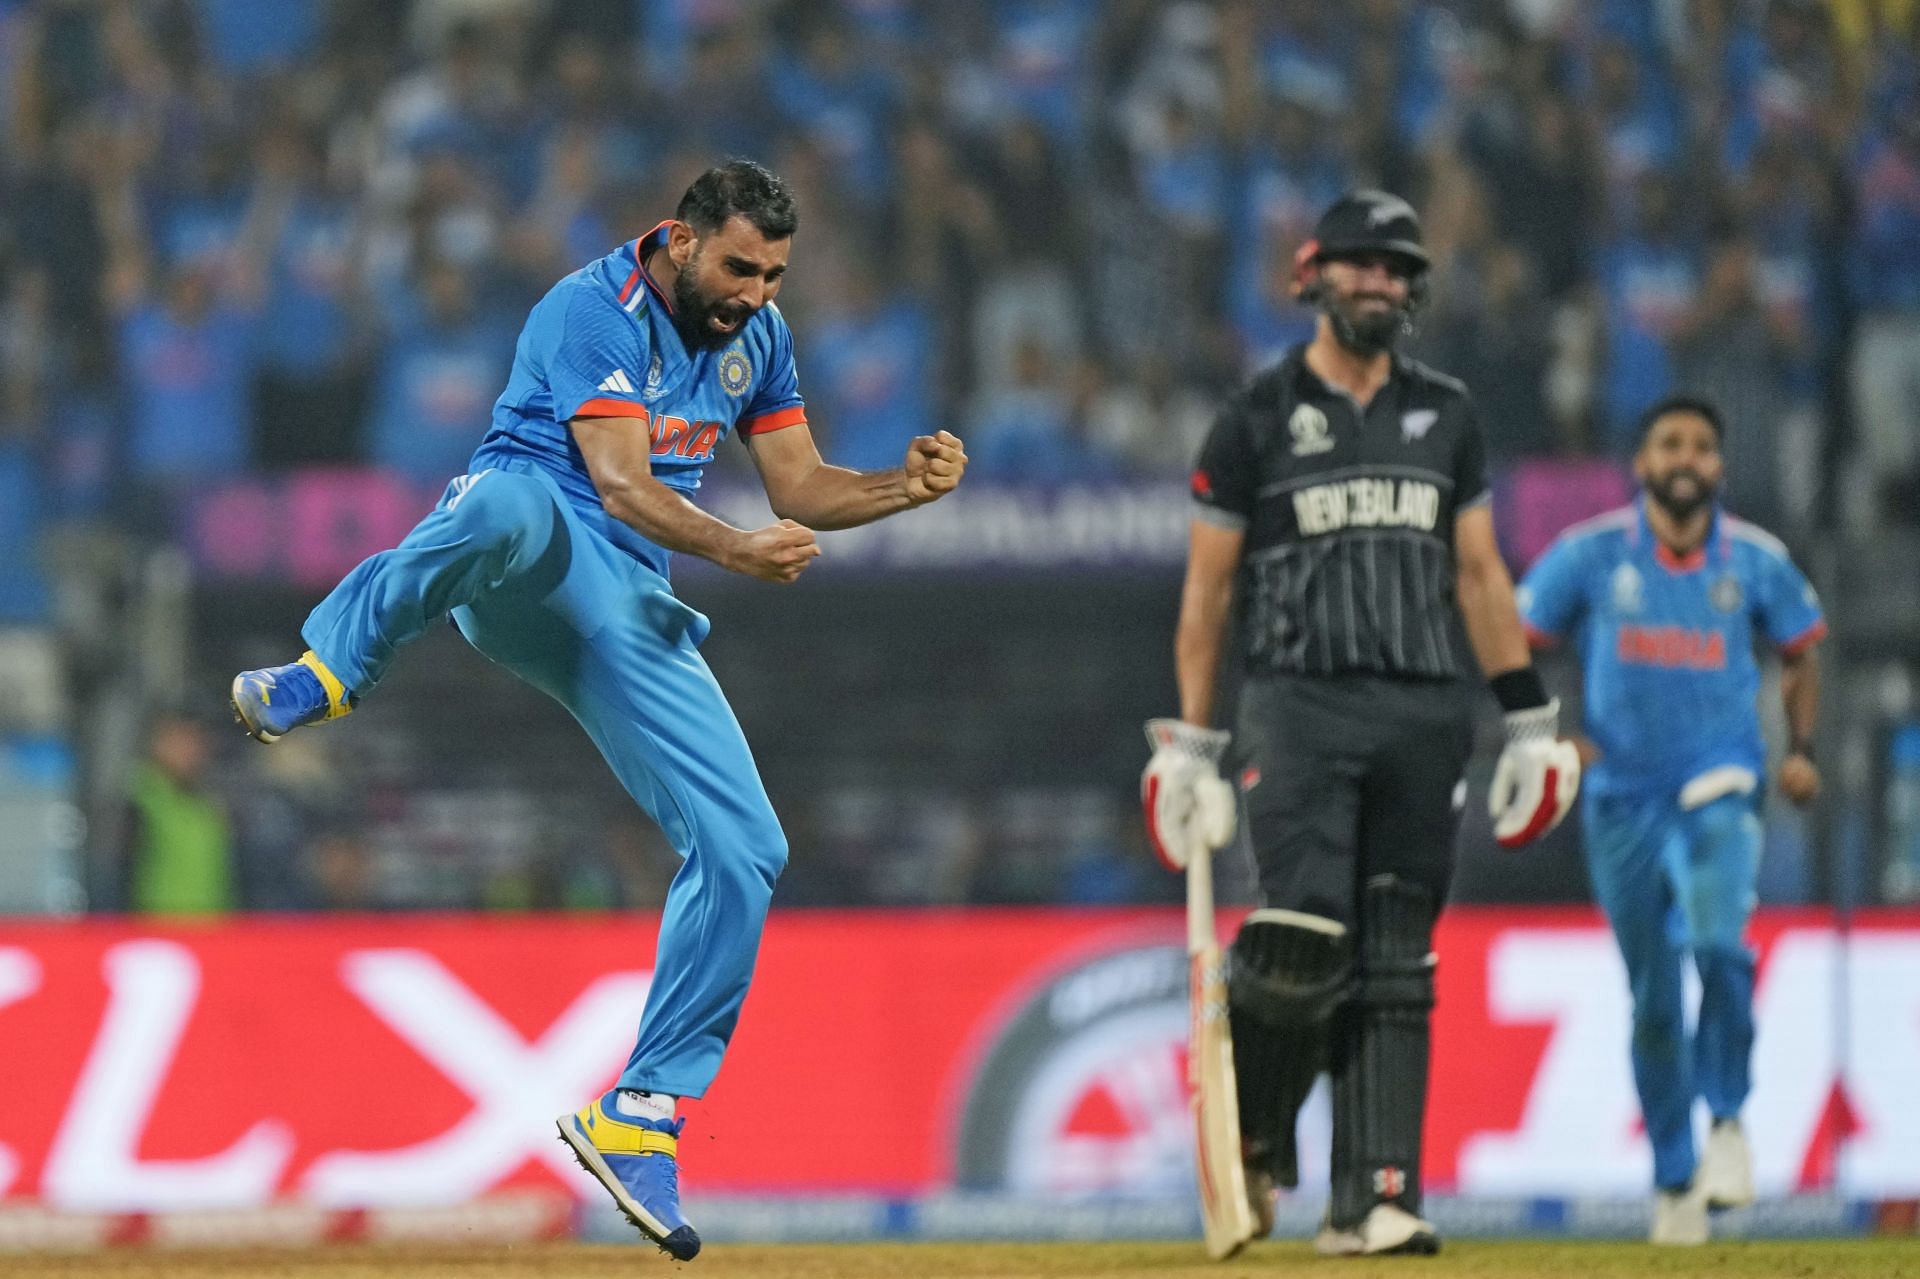 Mohammed Shami picked up a seven-wicket haul in the semi-final against New Zealand. [P/C: AP]